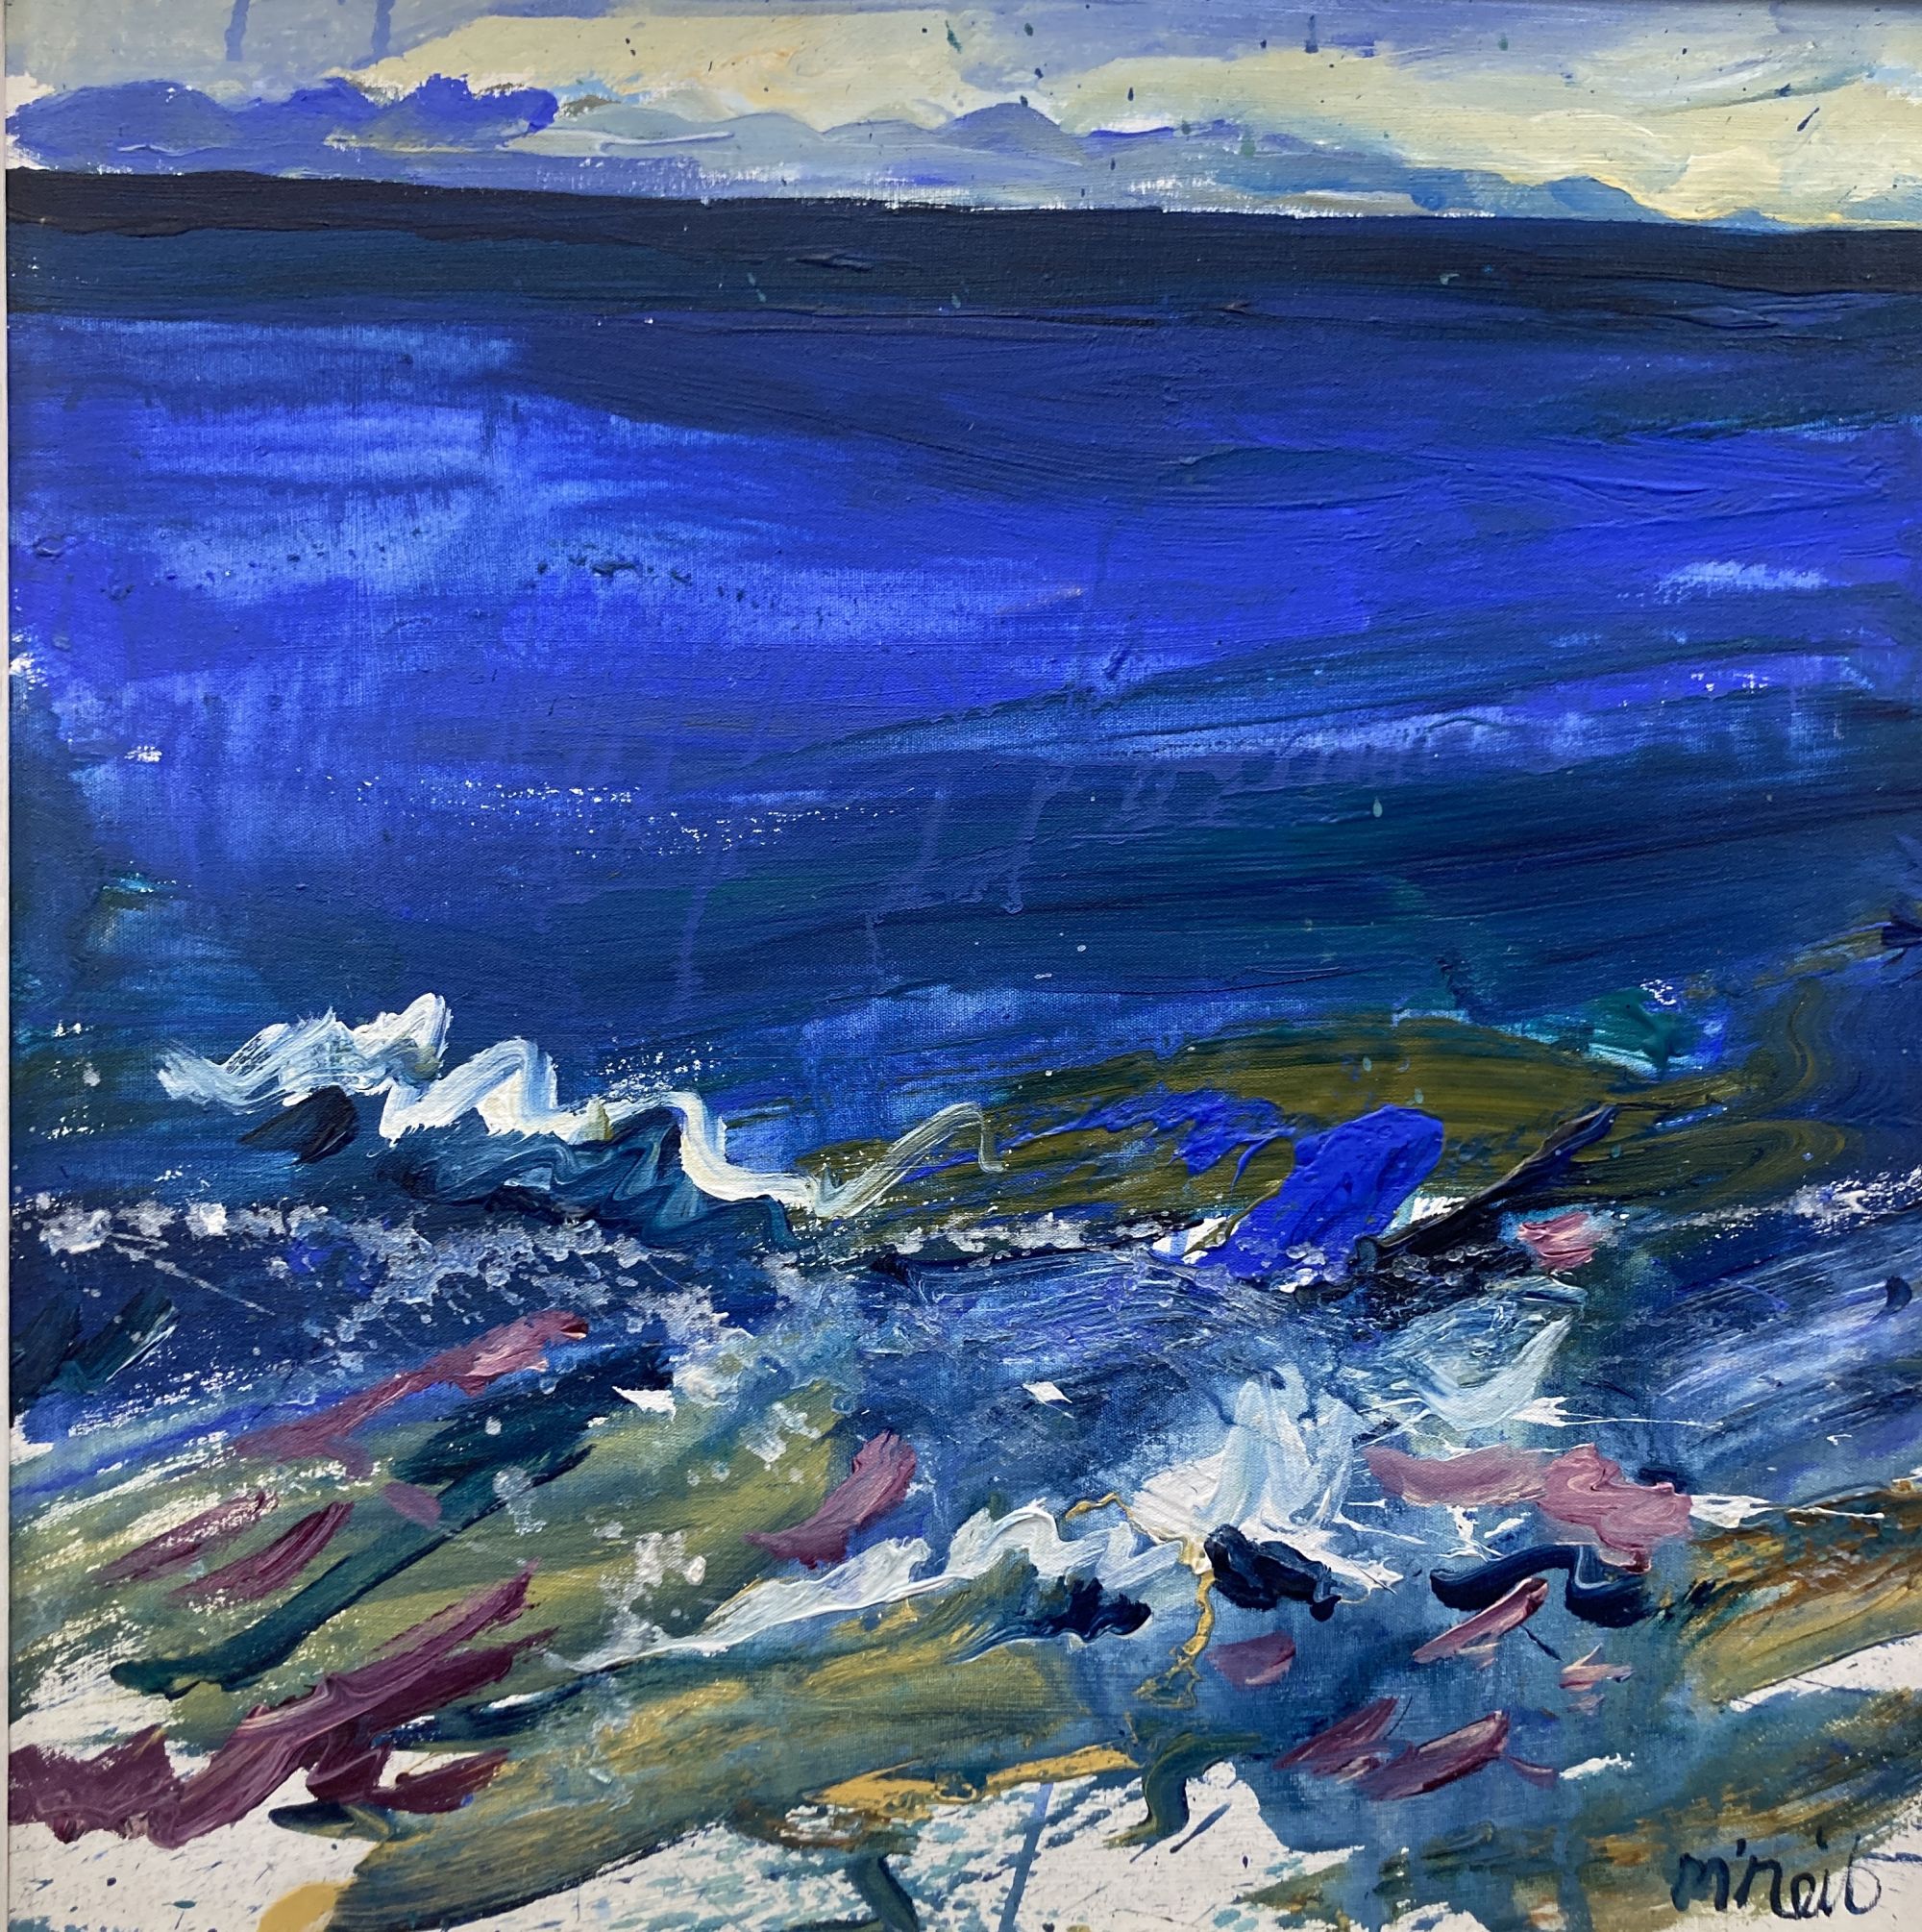 Don McNeil, acrylic on canvas, Jura from the Isthmus October 02, signed and inscribed verso, 60 x 60cm